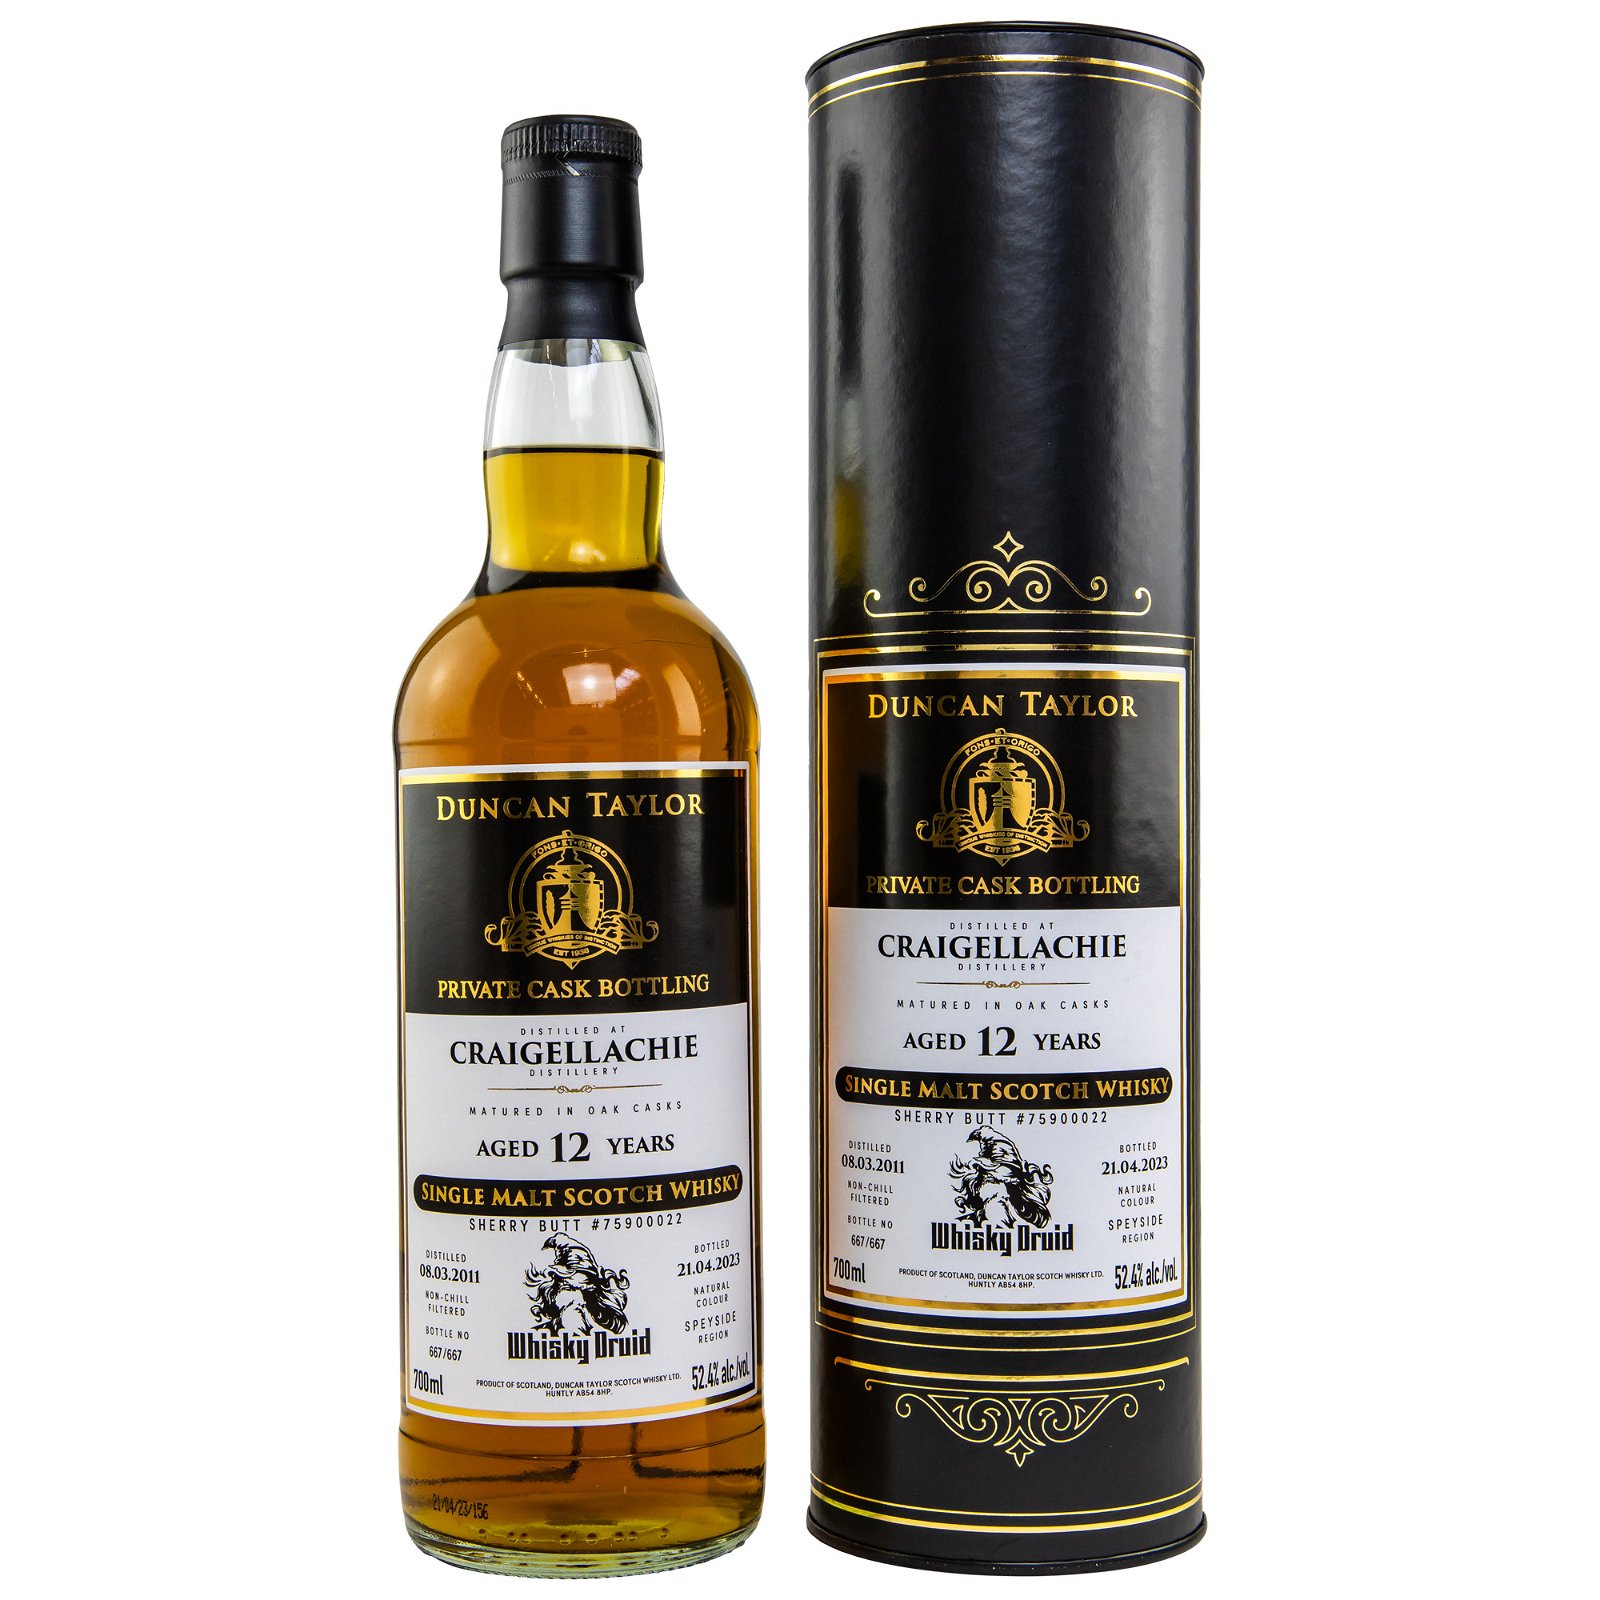 Craigellachie 2011/2023 - 12 Jahre Whisky Druid Sherry Butt No. 75900022 Private Cask Bottling (Duncan Taylor)